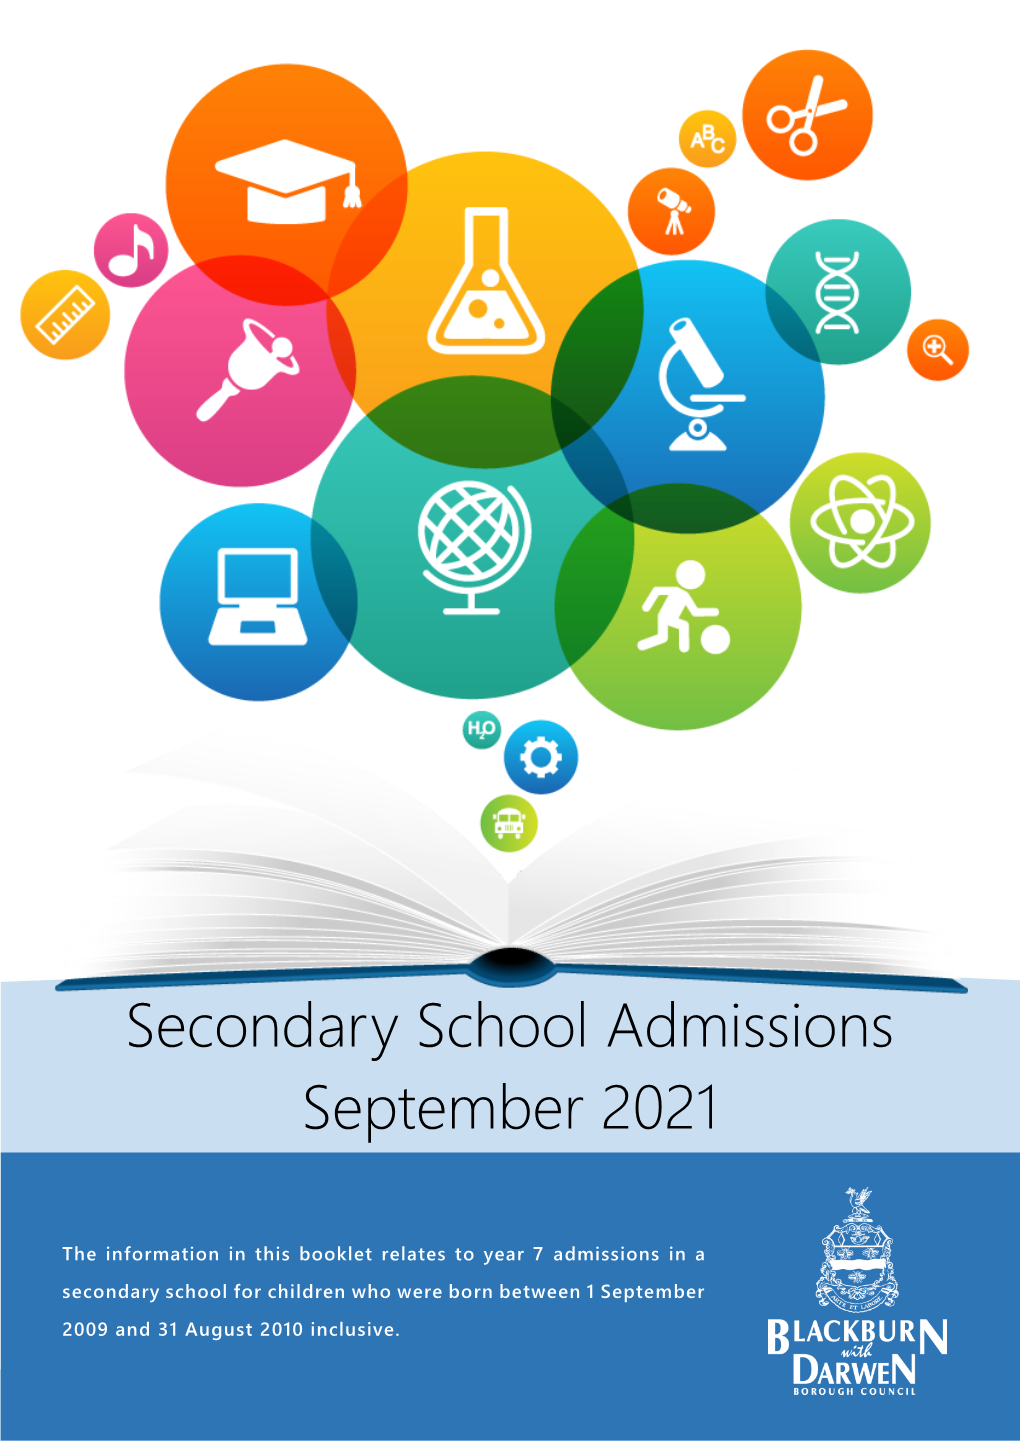 Secondary School Admissions September 2021’ Booklet and Certify That the Information Given in This Application Is Correct